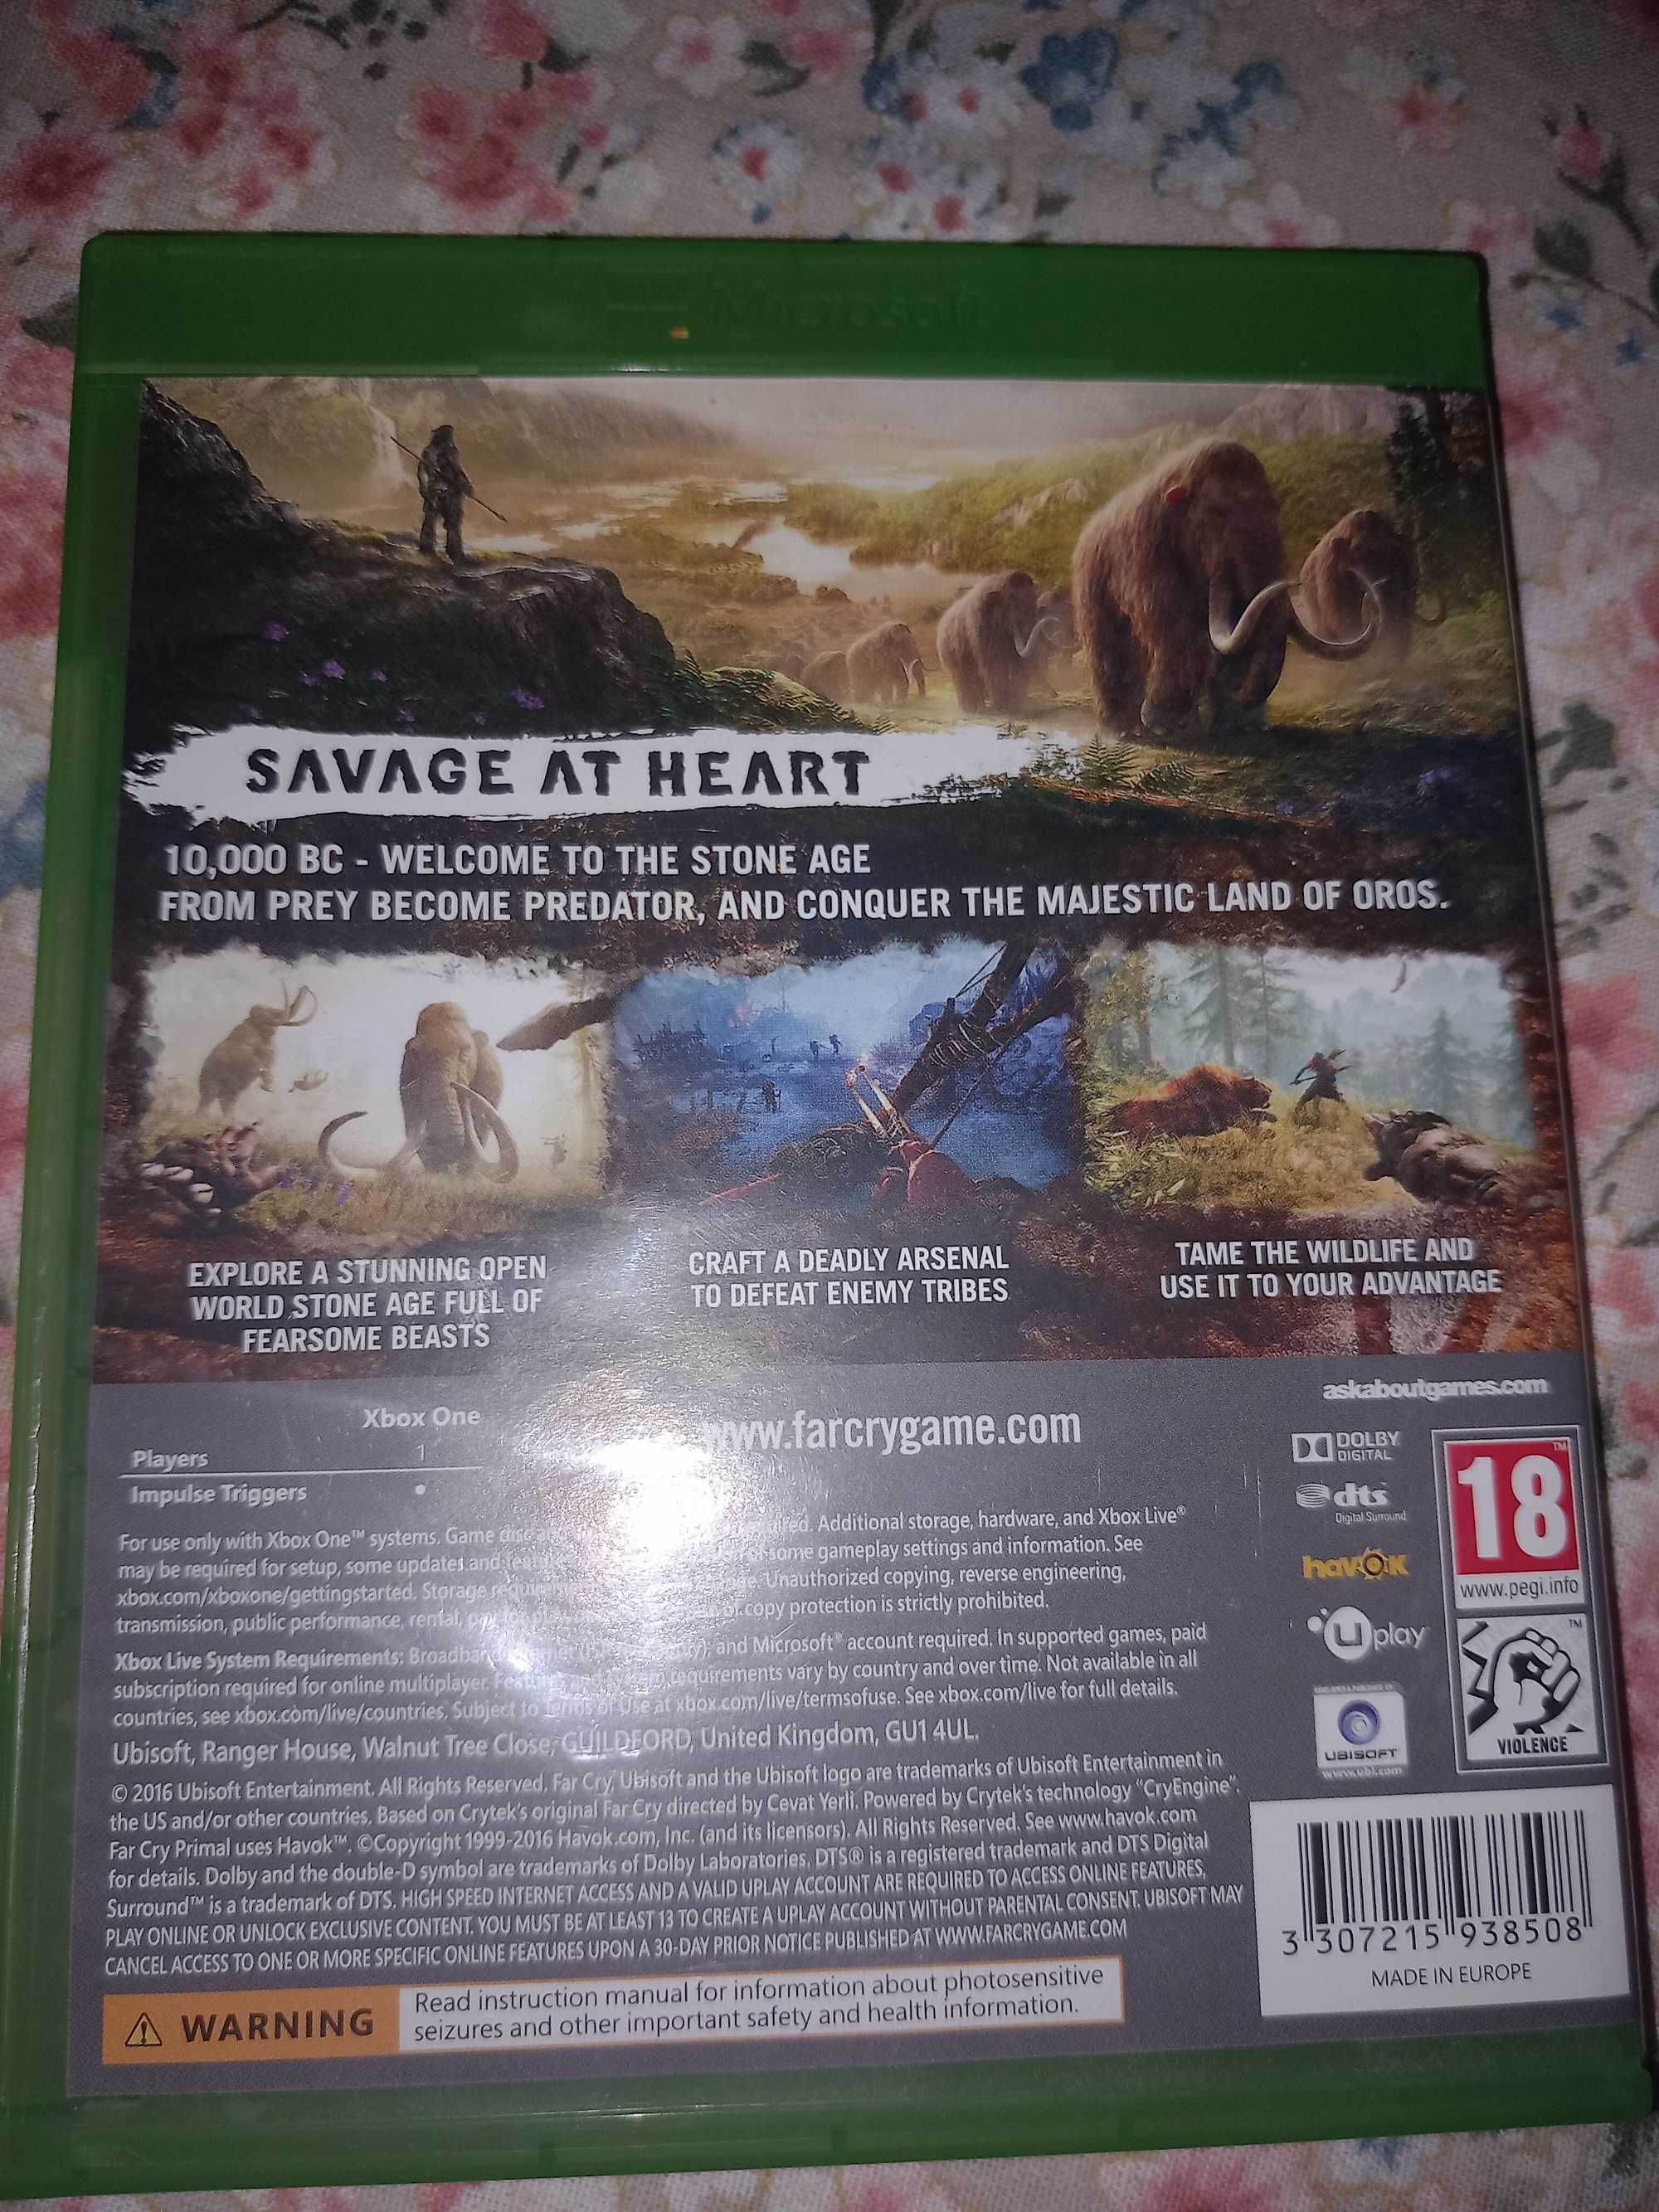 Farcry primal xbox one